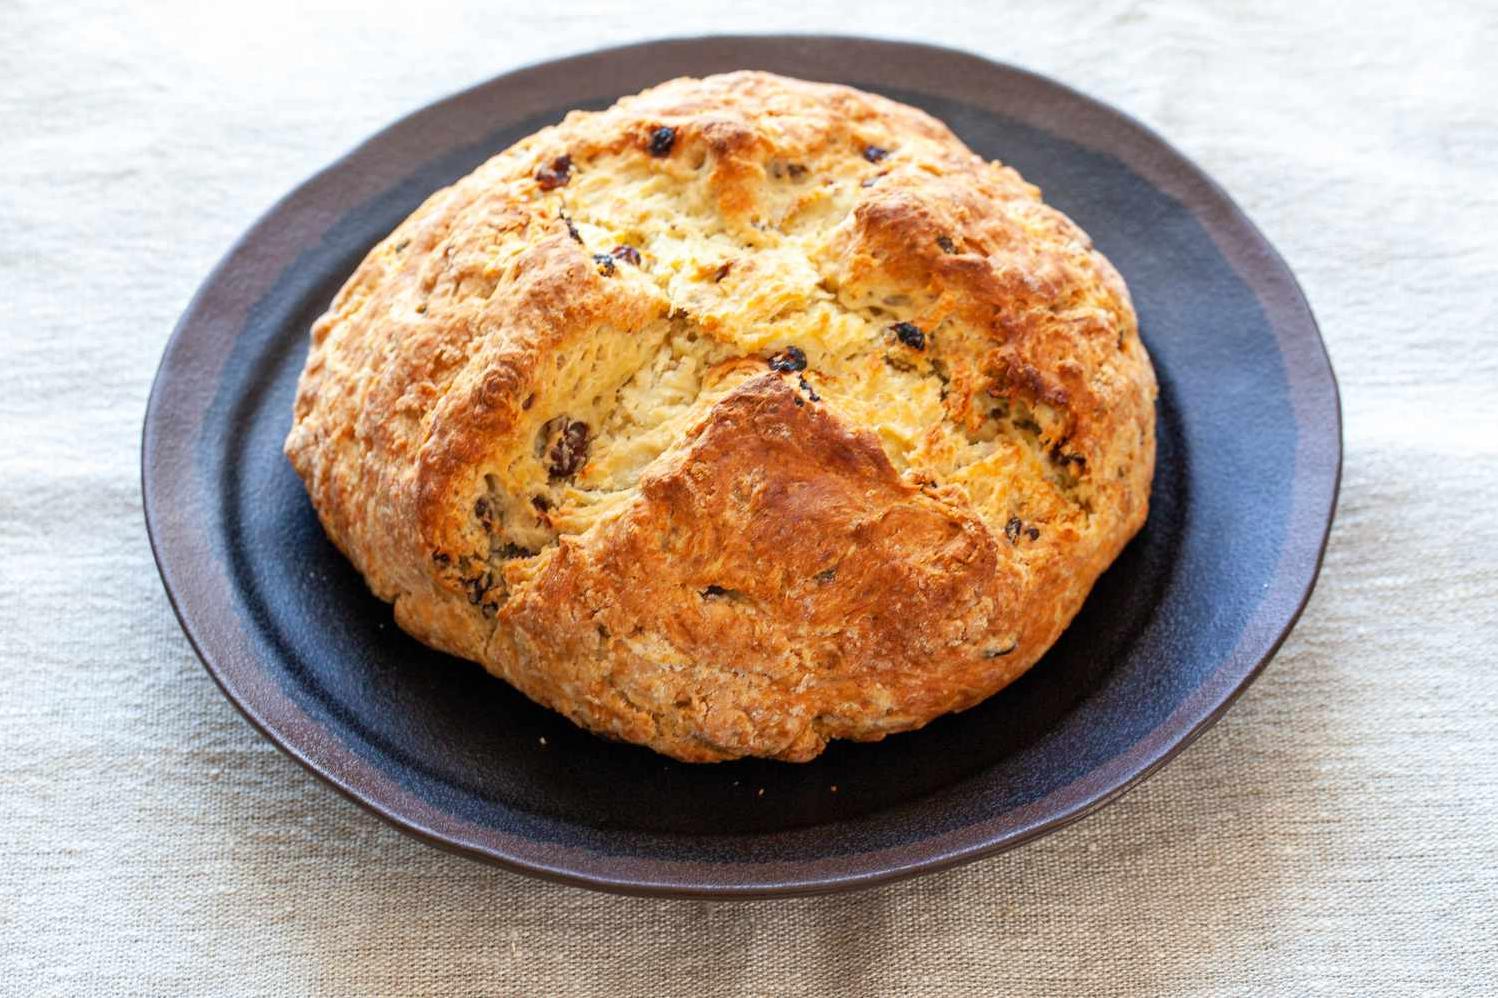  This recipe is a great way to achieve that classic, rustic Irish bread taste.